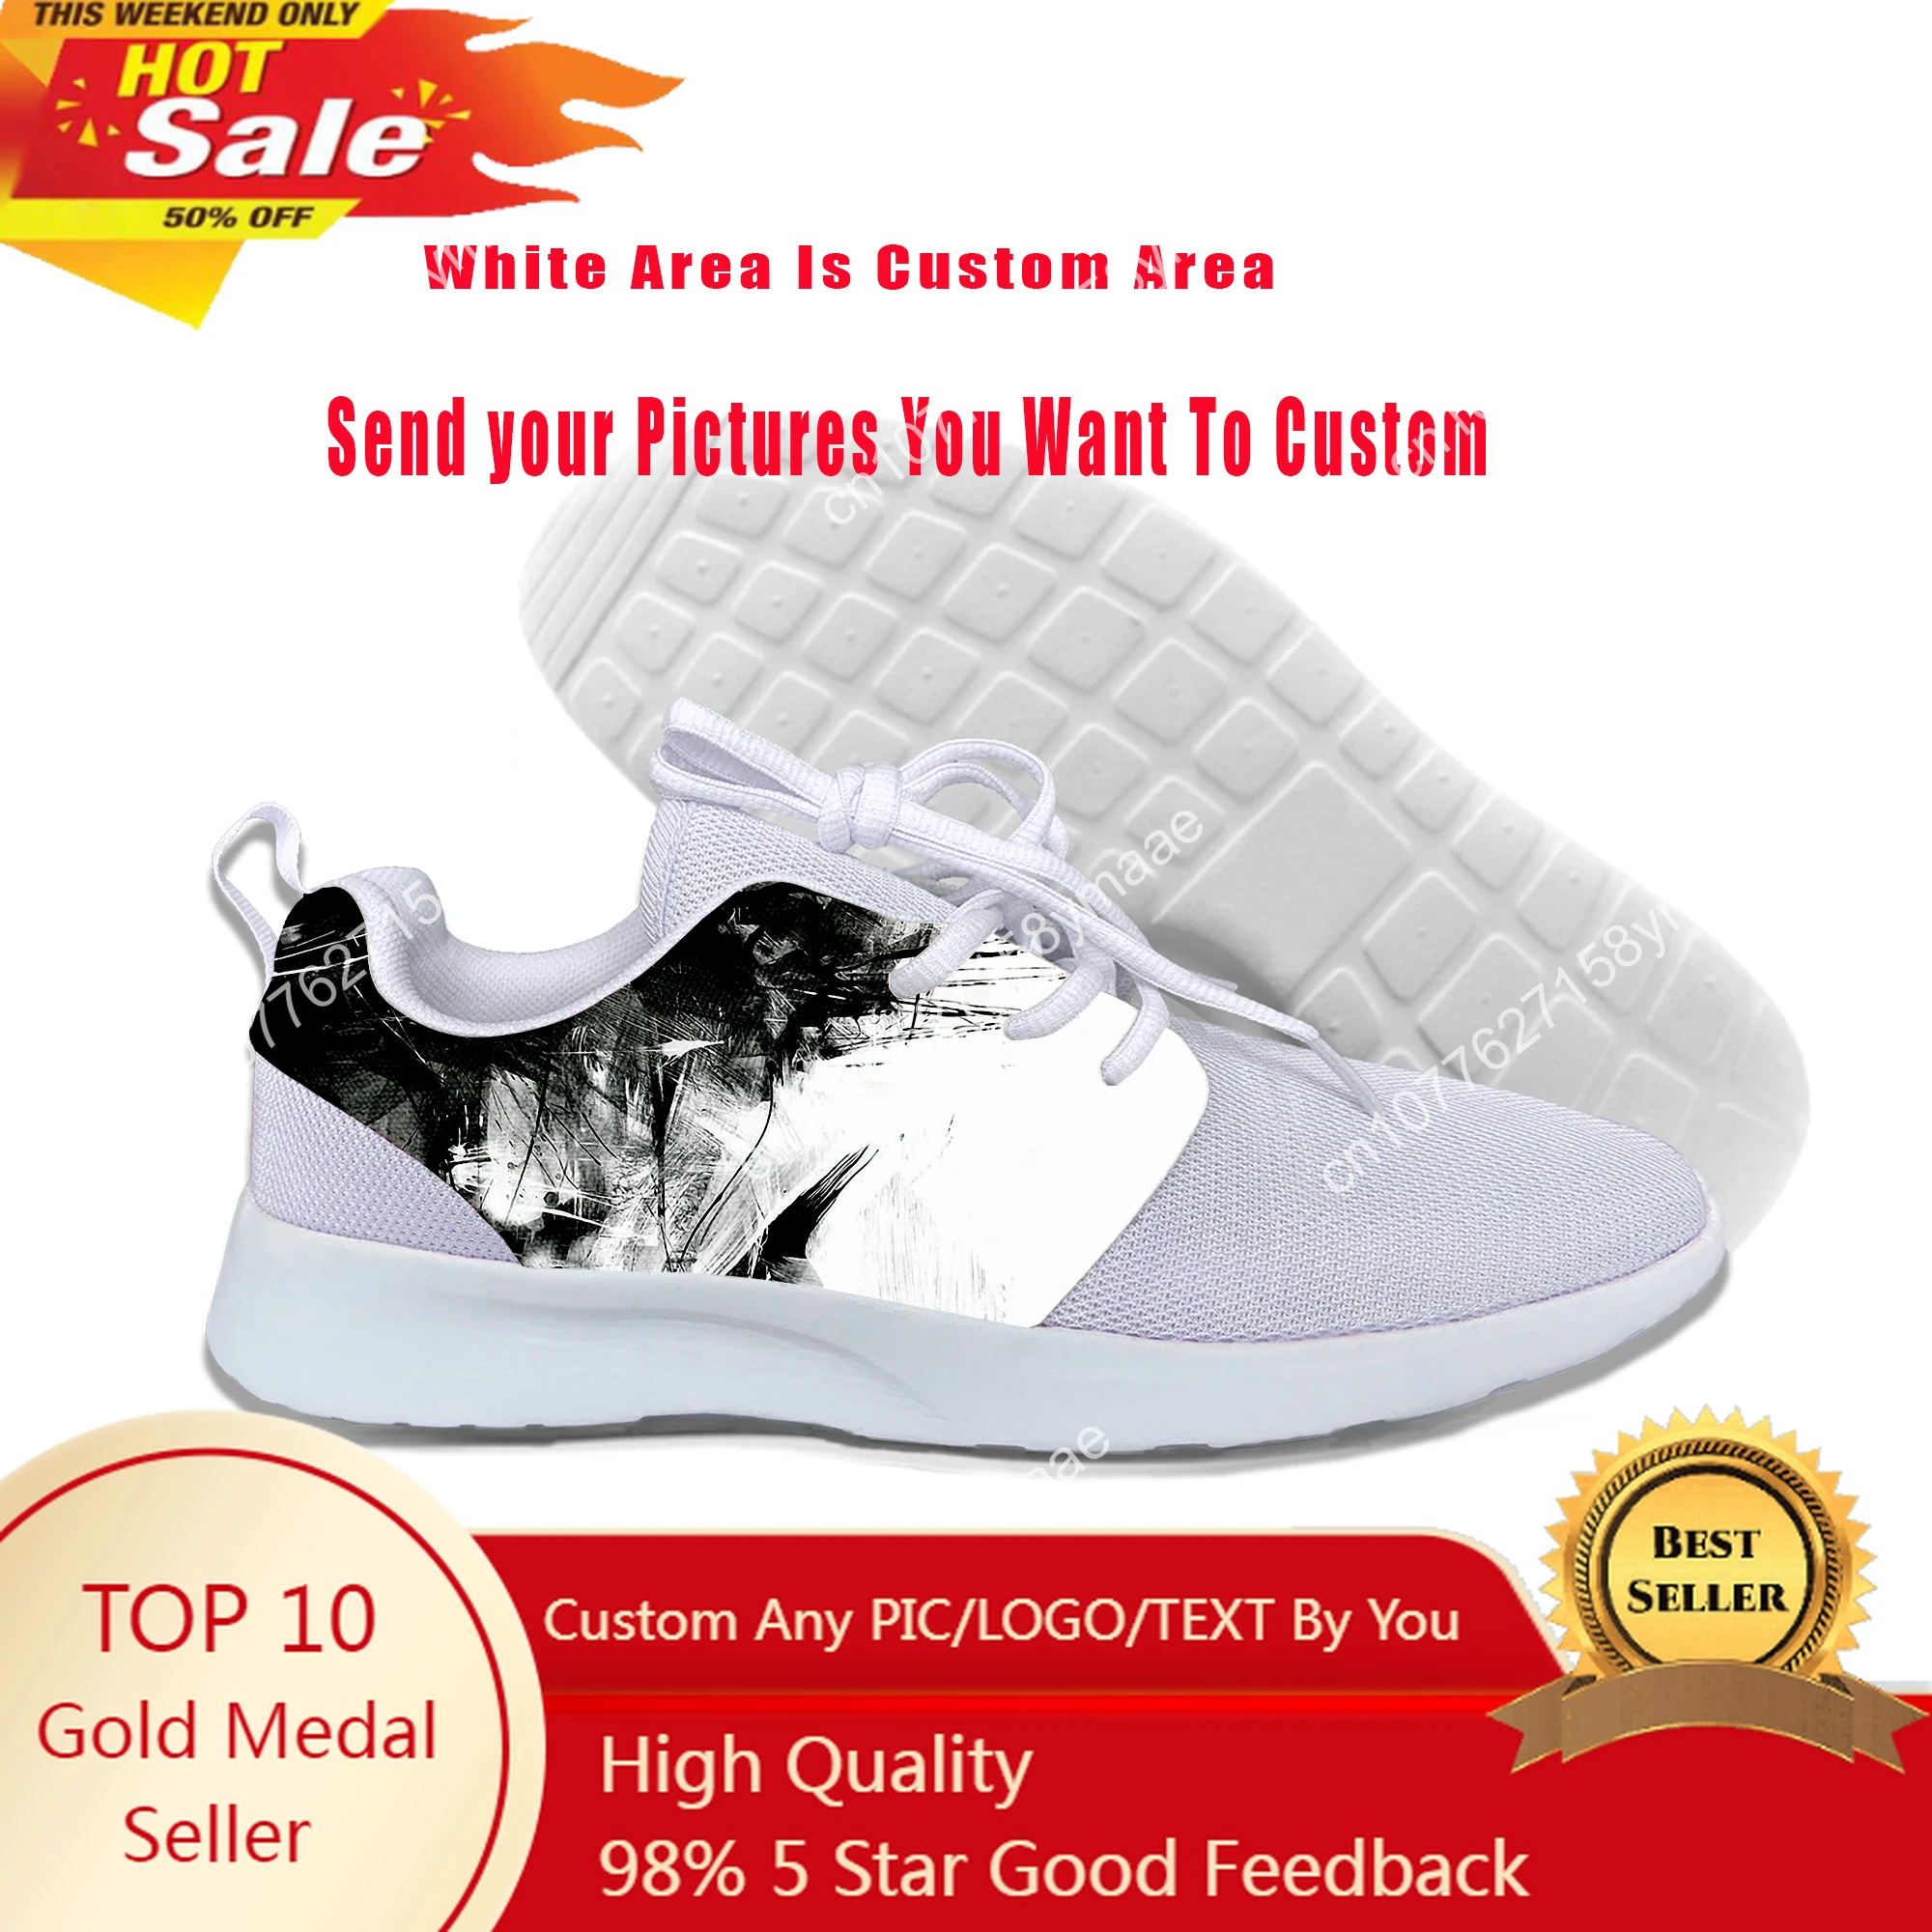 Hot Cool Splashed Paint Casual Shoes Summer Shoes Men Short Printed 3D Sneakers Lightweight Running Shoes Classic Sports Shoes sports shoes sneakers hot forest deer for high quality harajuku 3d printing forest deers running walking gym shoes men